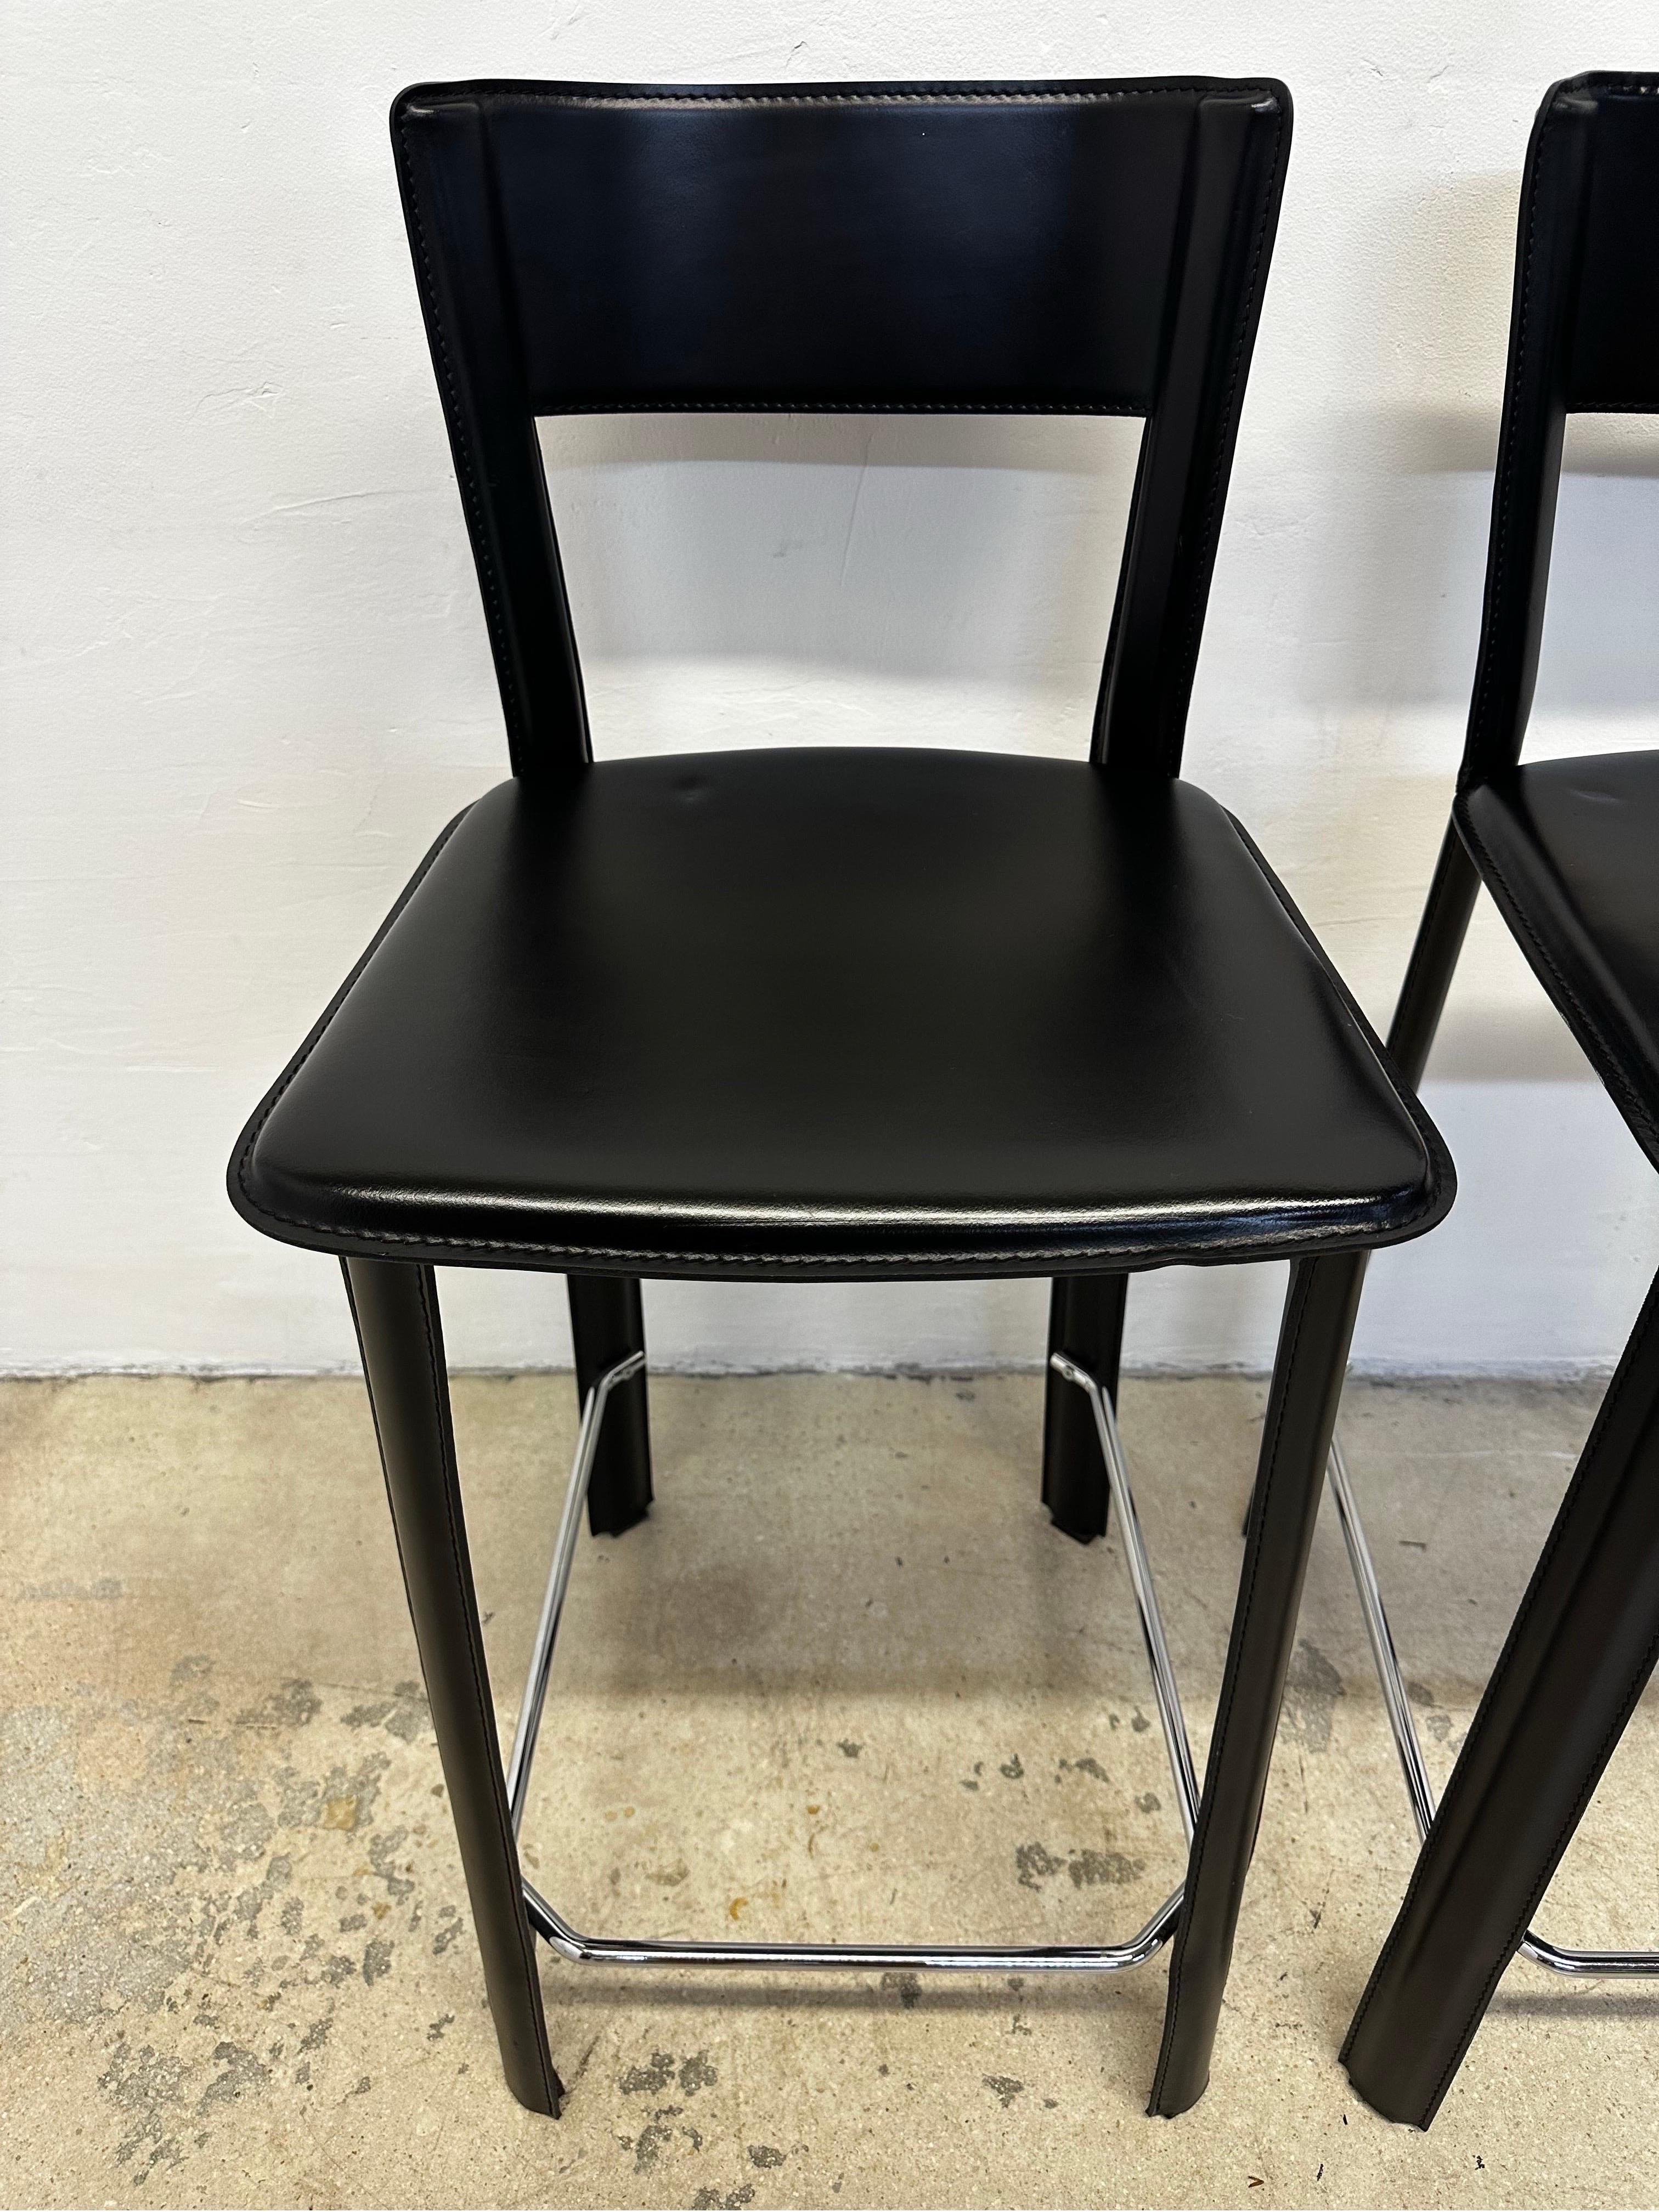 Frag Italy Stitched Black Leather Counter Stools - a Pair 4